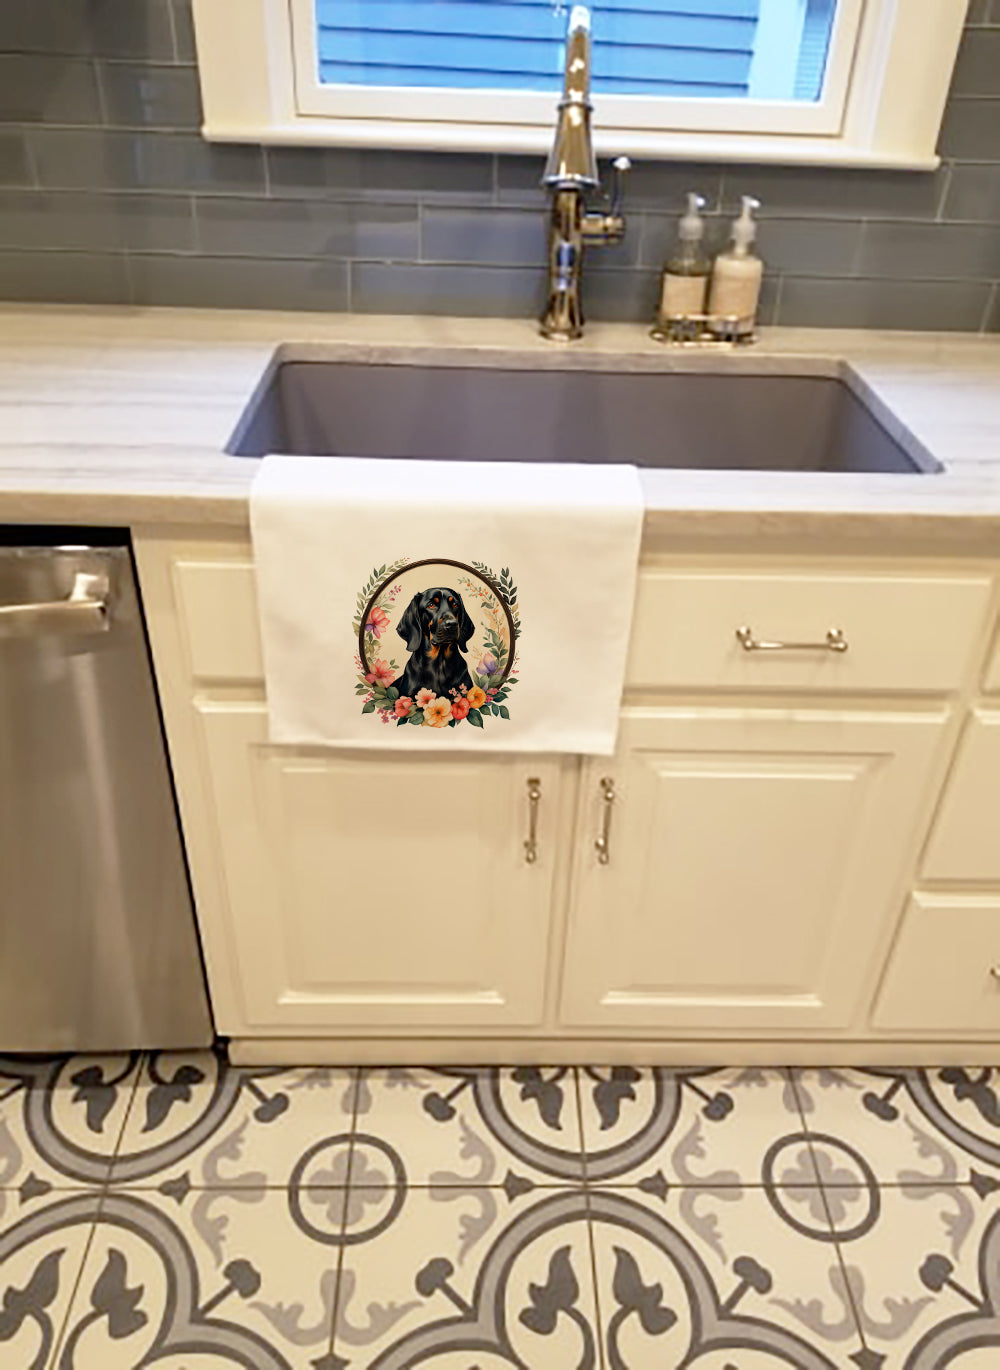 Buy this Black and Tan Coonhound and Flowers Kitchen Towel Set of 2